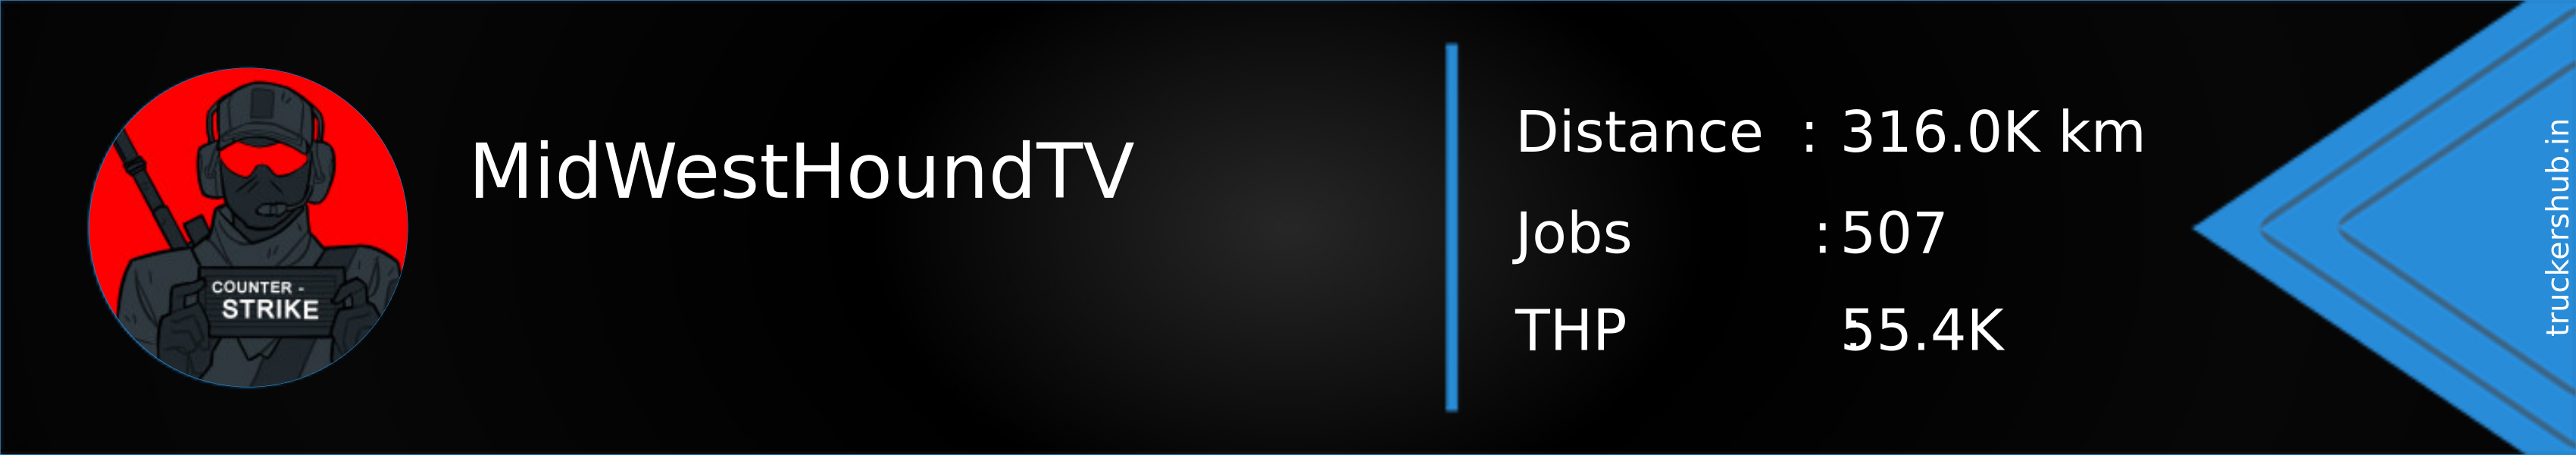 MidWestHoundTV Banner